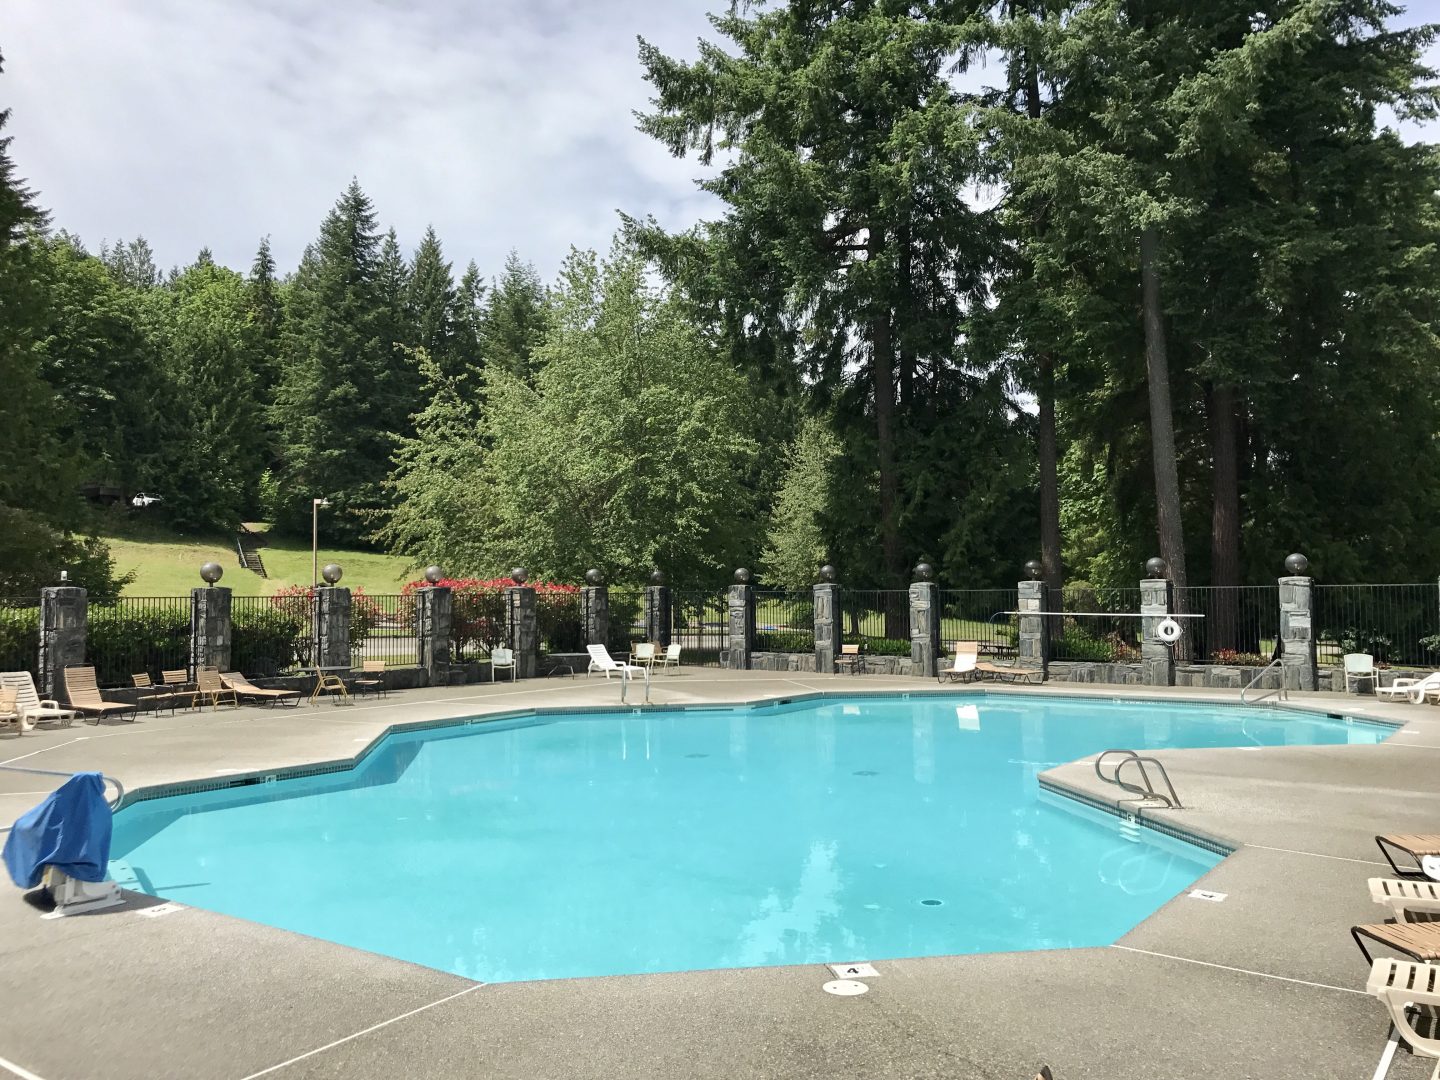 The resort-style pool at Tall Chief is second to none we've seen at any campground so far!